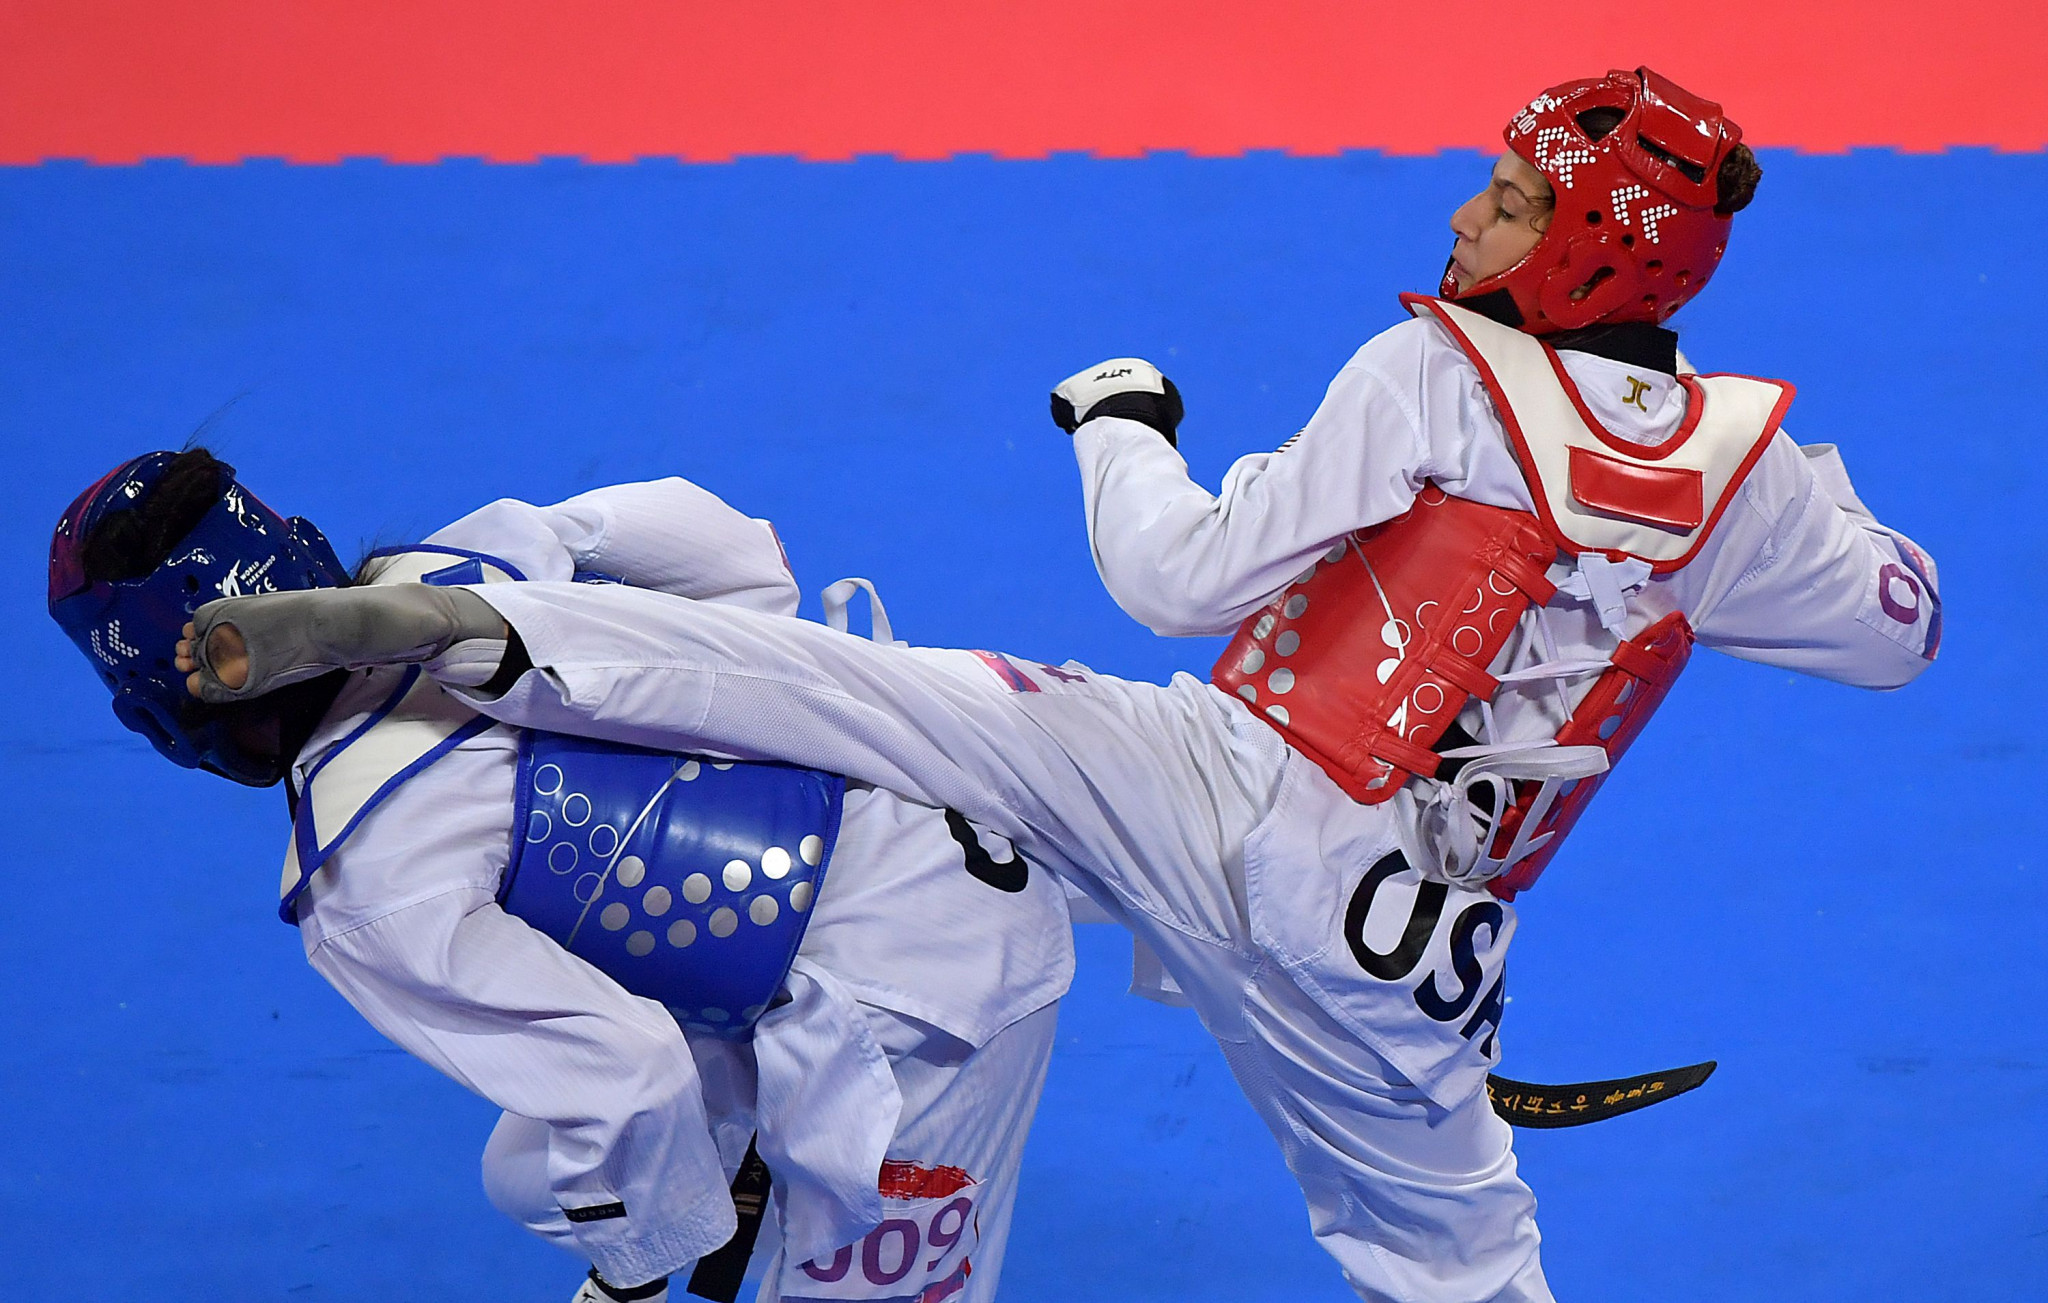 Anastasija Zolotic claimed gold in the women's 57kg event ©Getty Images